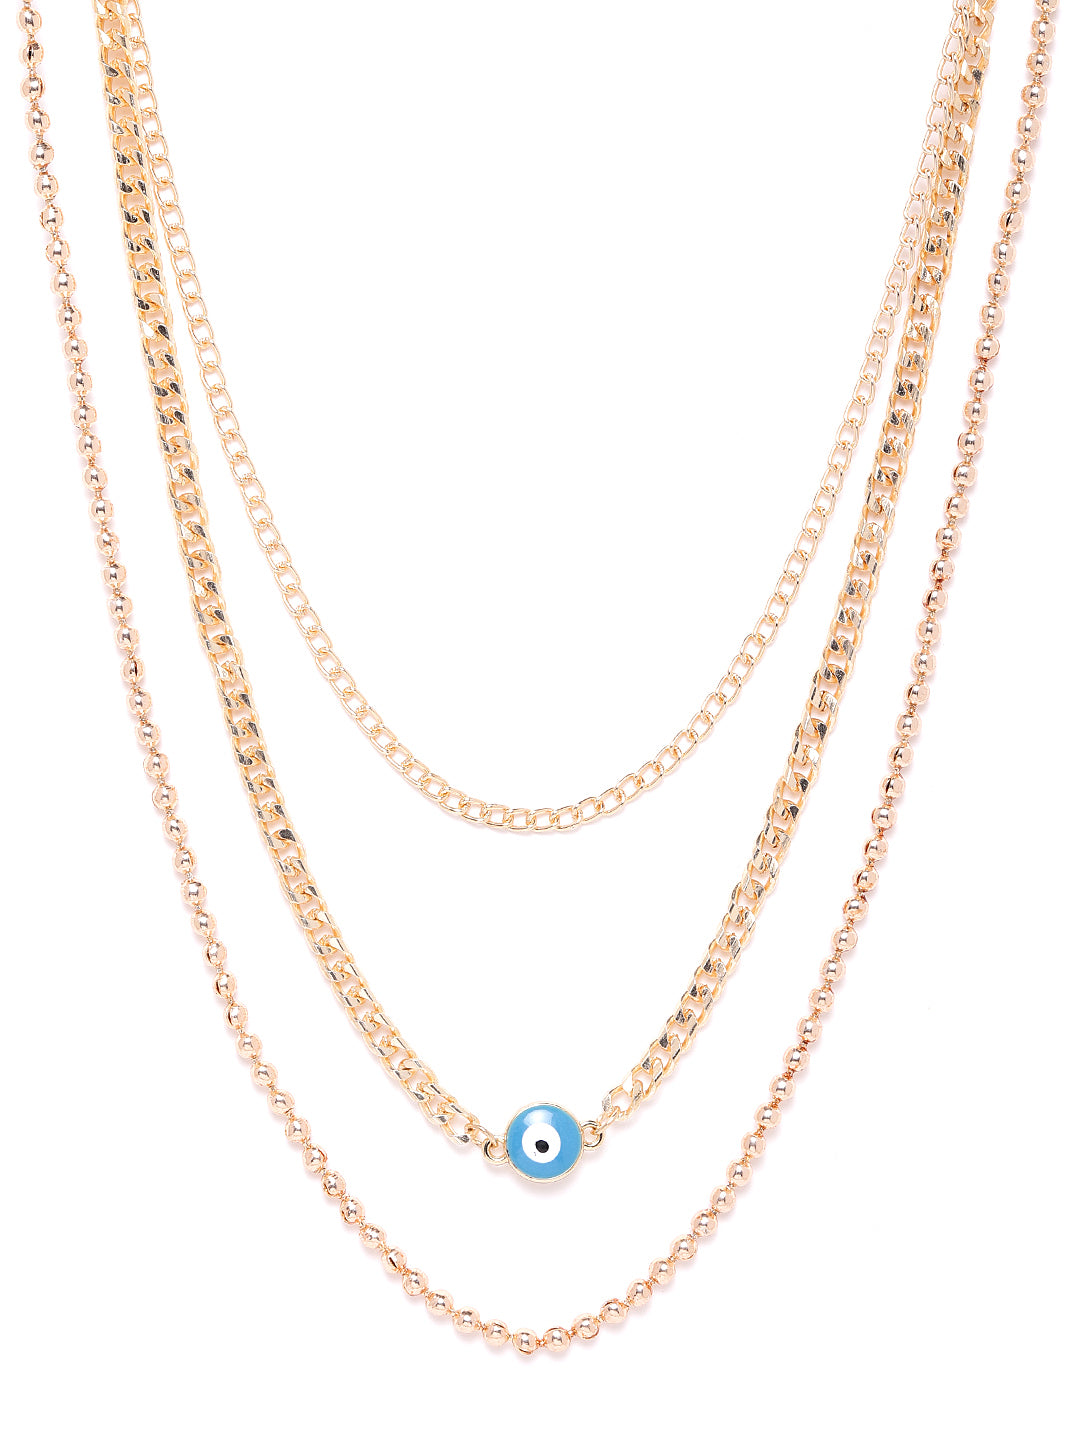 Blueberry gold Plated Evil Eye detailing chain layered necklace